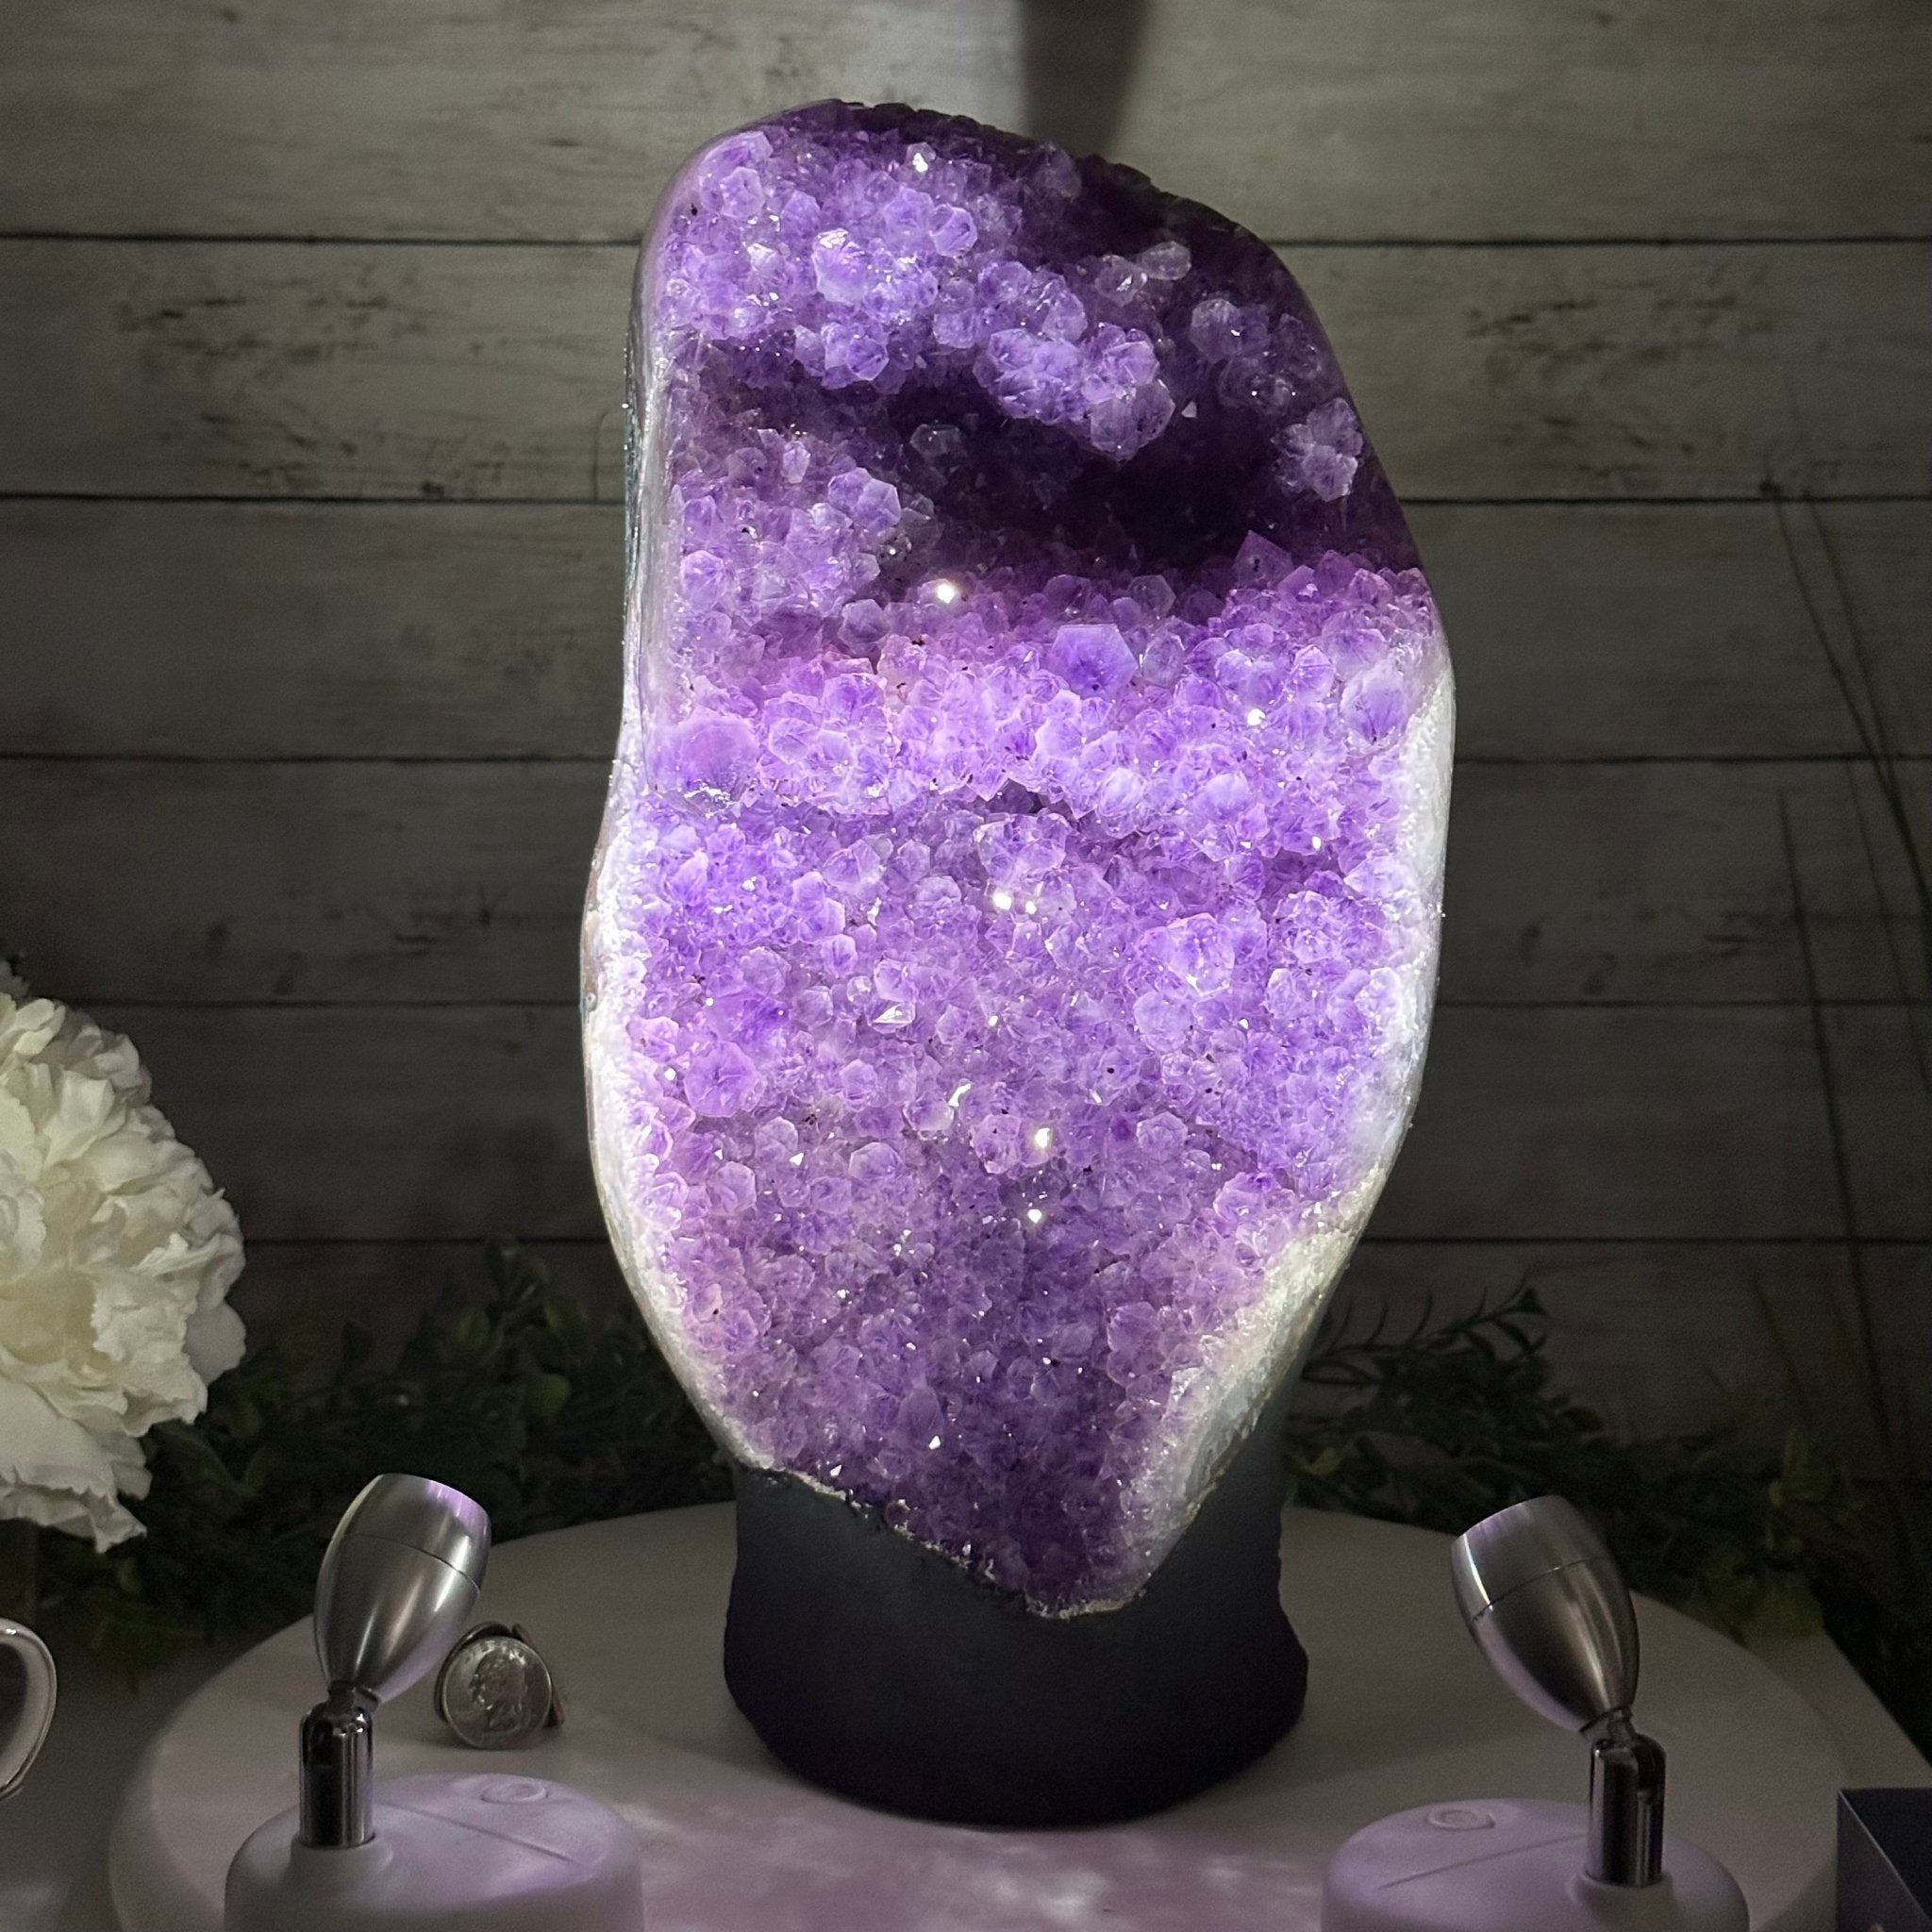 Extra Plus Quality Amethyst Cluster, Cement Base, 13.8" Tall #5614-0116 - Brazil GemsBrazil GemsExtra Plus Quality Amethyst Cluster, Cement Base, 13.8" Tall #5614-0116Clusters on Cement Bases5614-0116